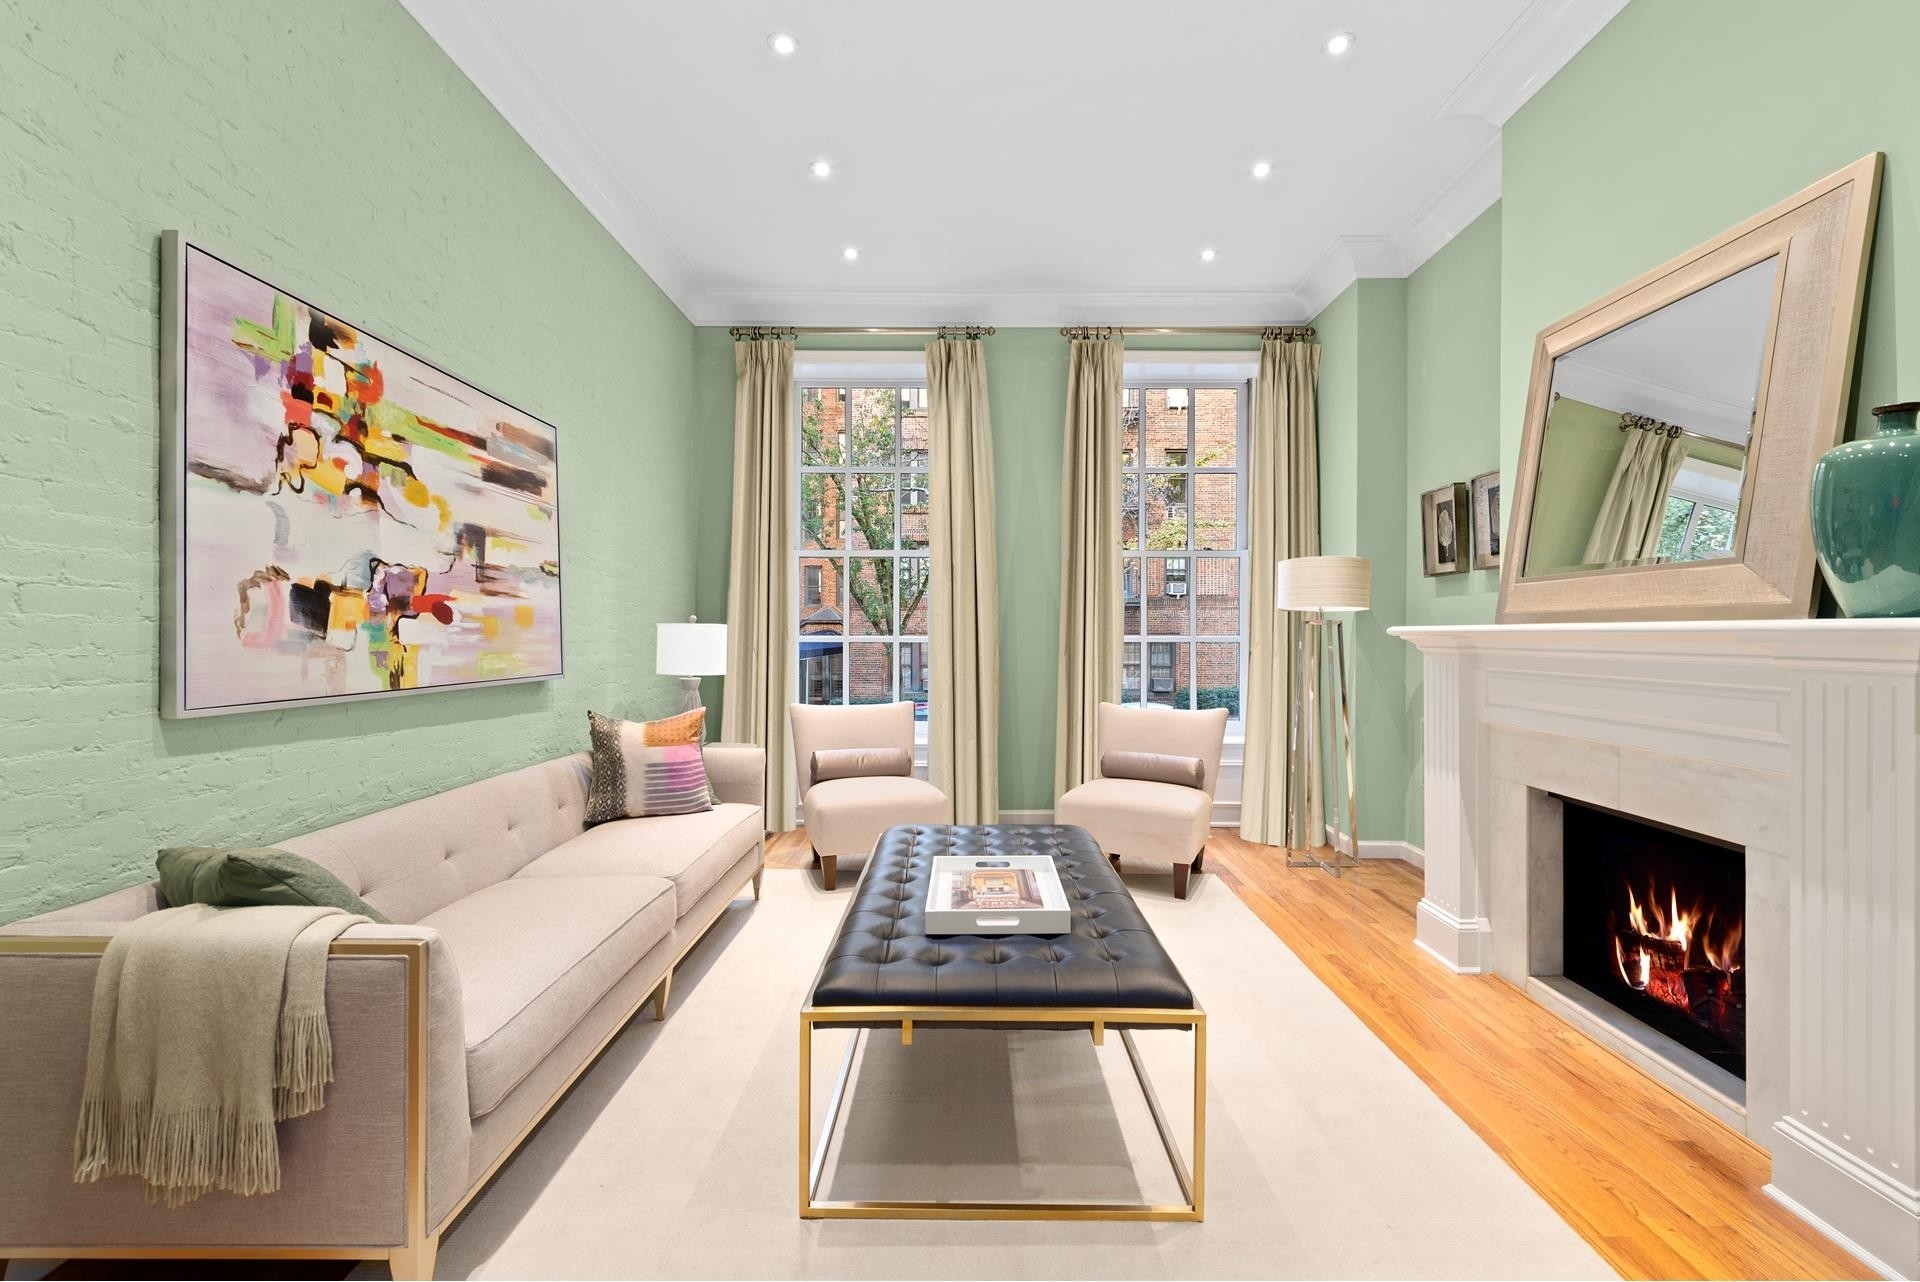 2. Single Family Townhouse for Sale at 247 E 71ST ST, TOWNHOUSE Lenox Hill, New York, NY 10021